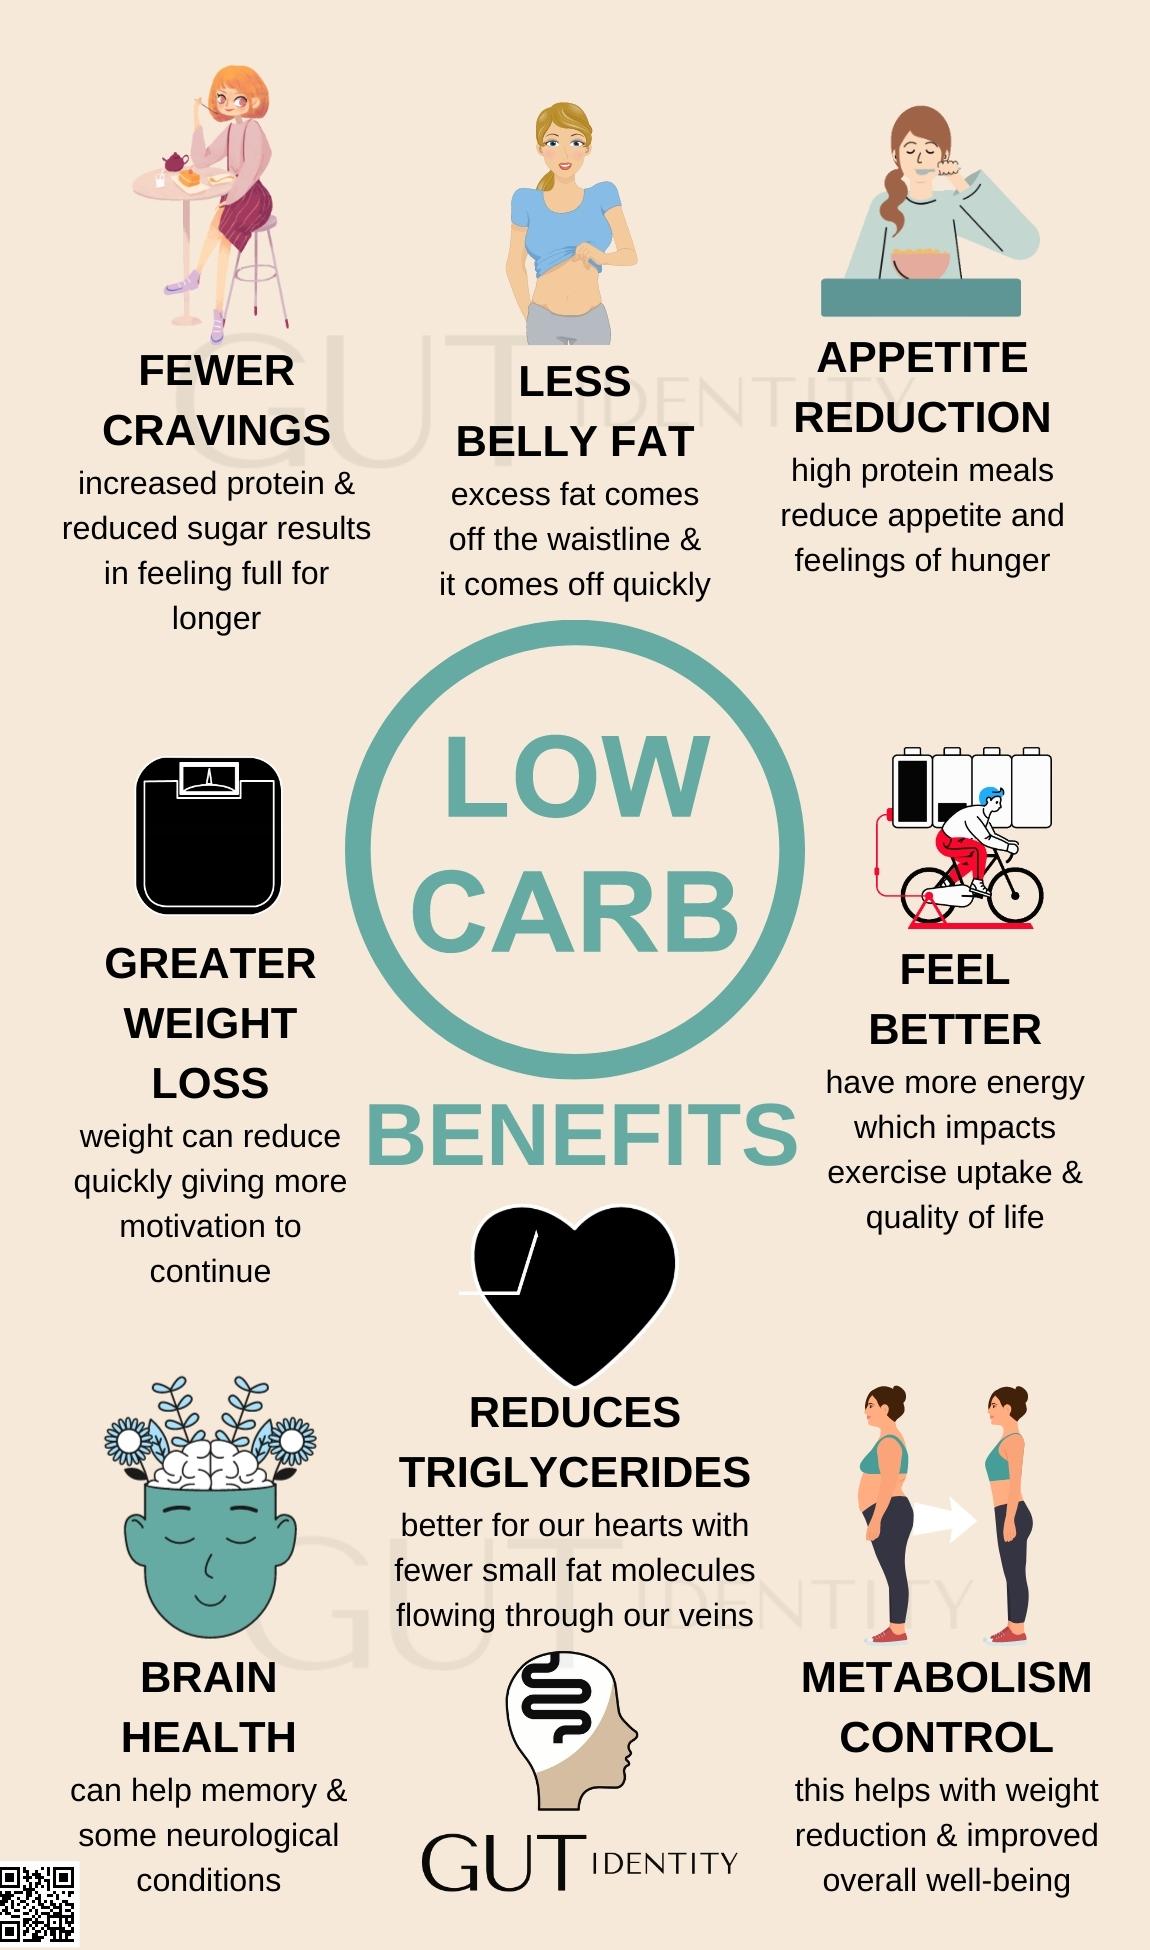 Benefits of a Low-Carb Diet - Reduce Cravings and Feel Better Gutidentity